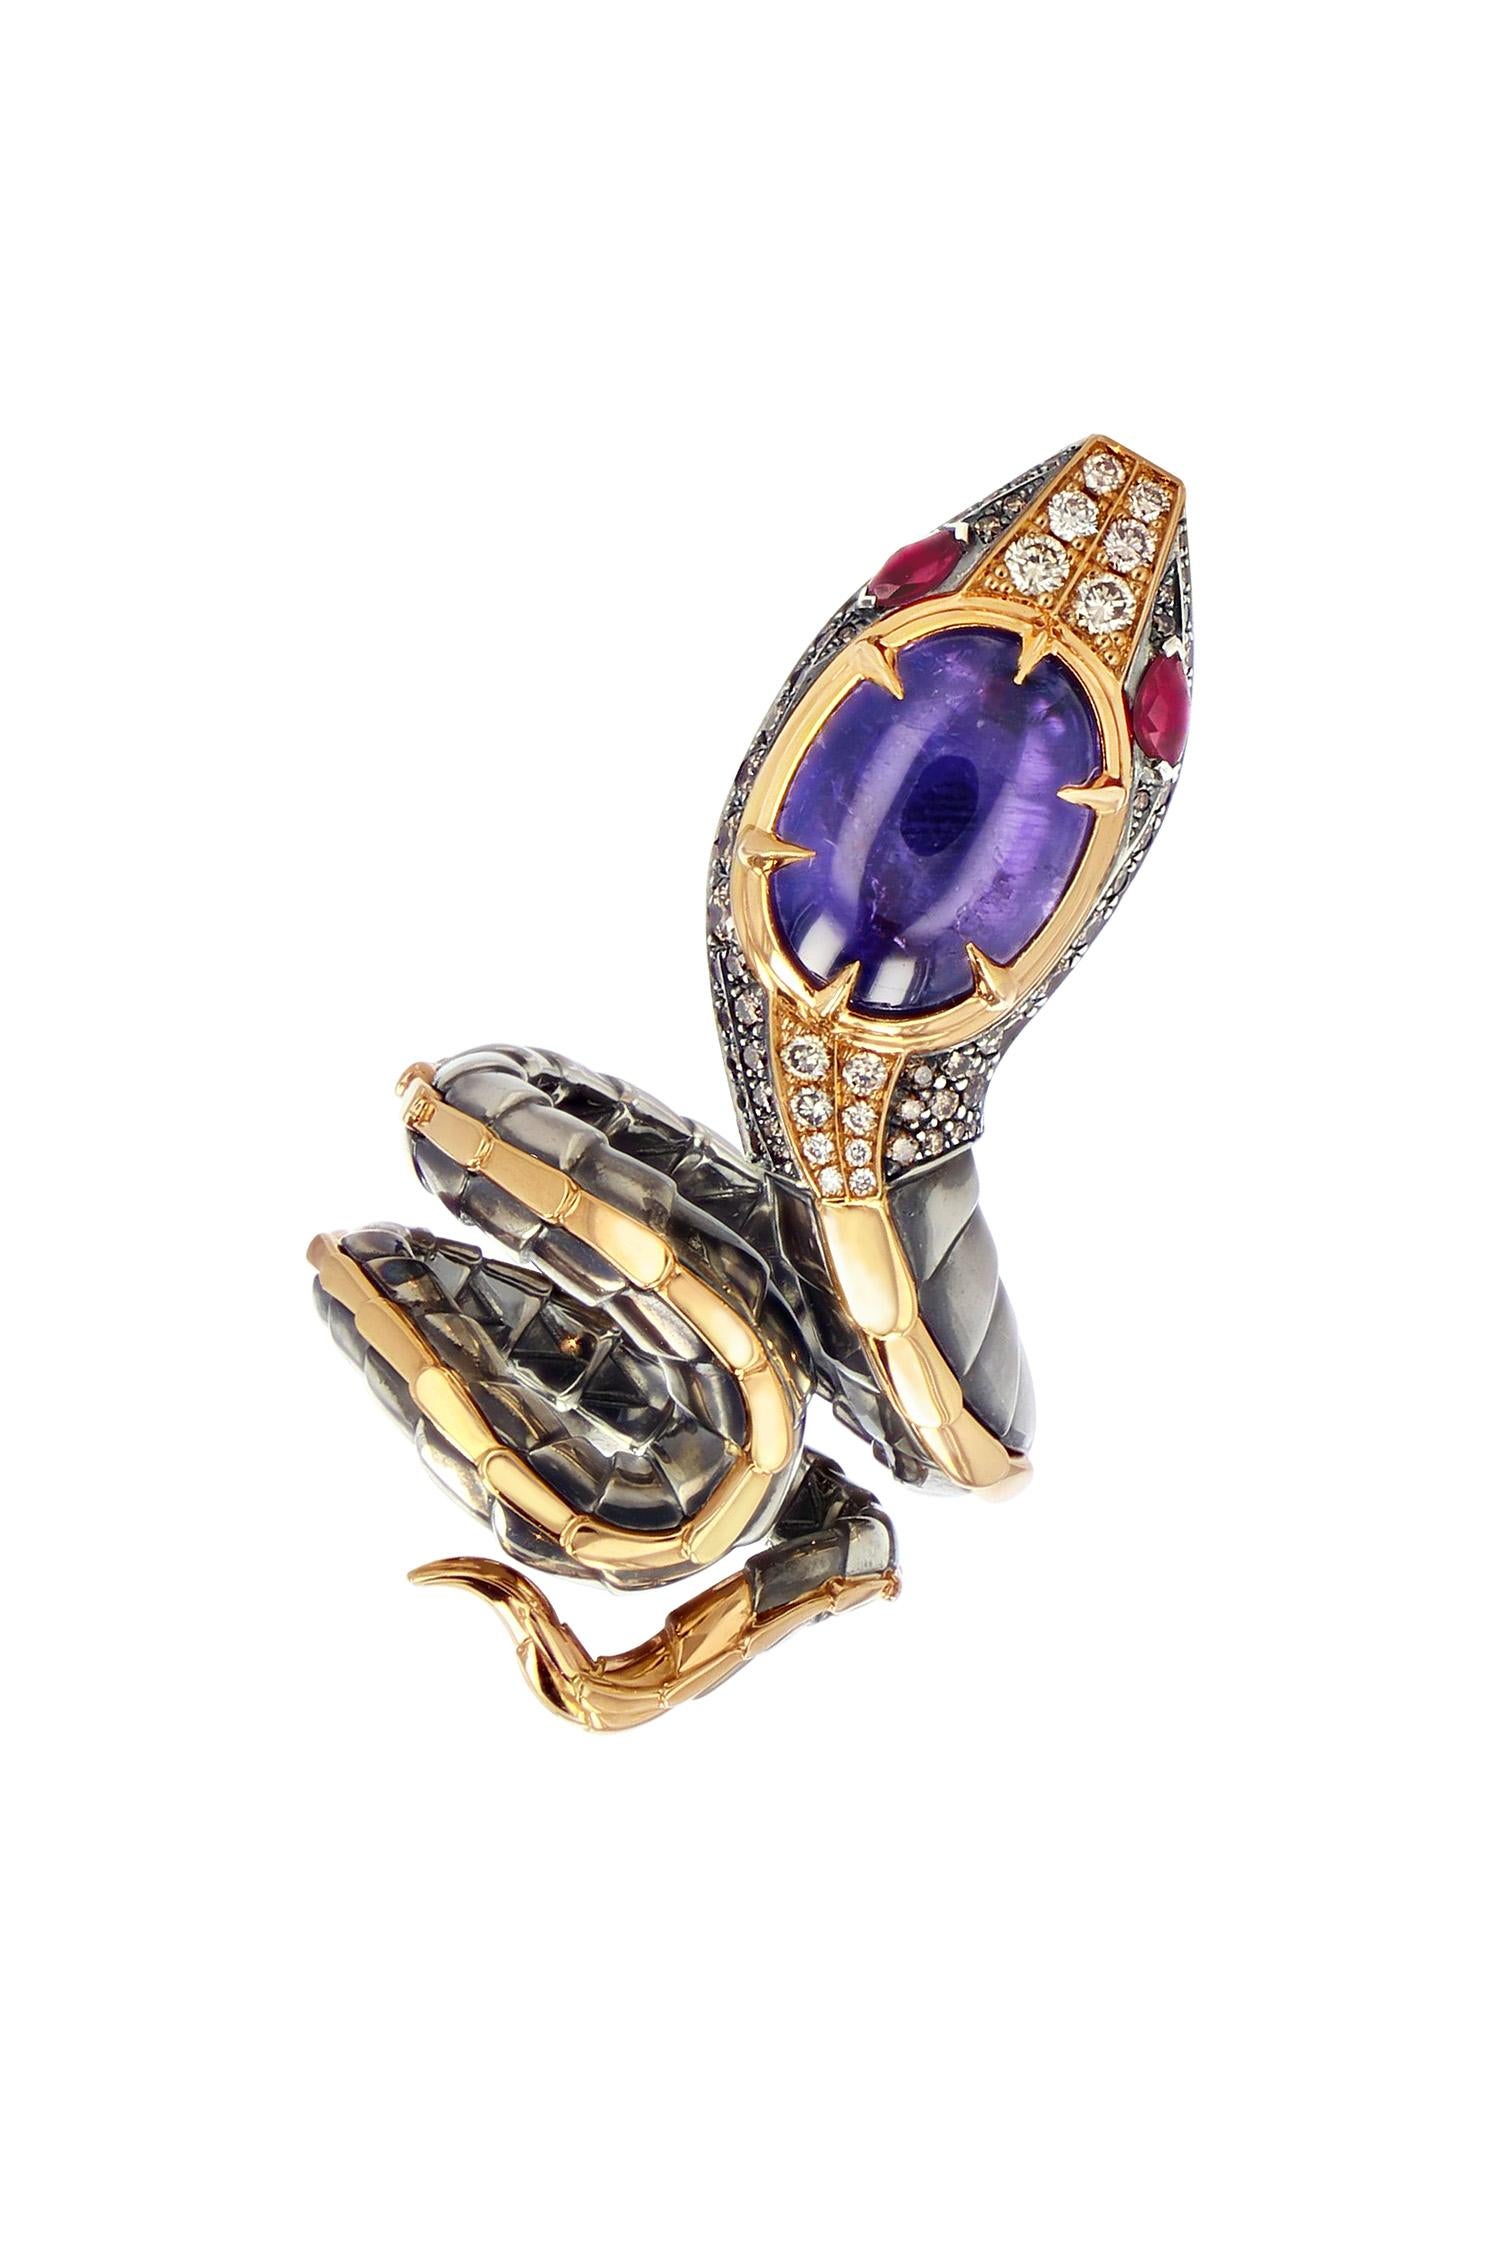 Rose gold and distressed silver ring. The body, wrapped in distressed silver scales with a rose gold dorsal ridge, ends with a head that is paved with diamonds and animated with  rubis eyes. At its summit, it is set with a cabochon cut purple